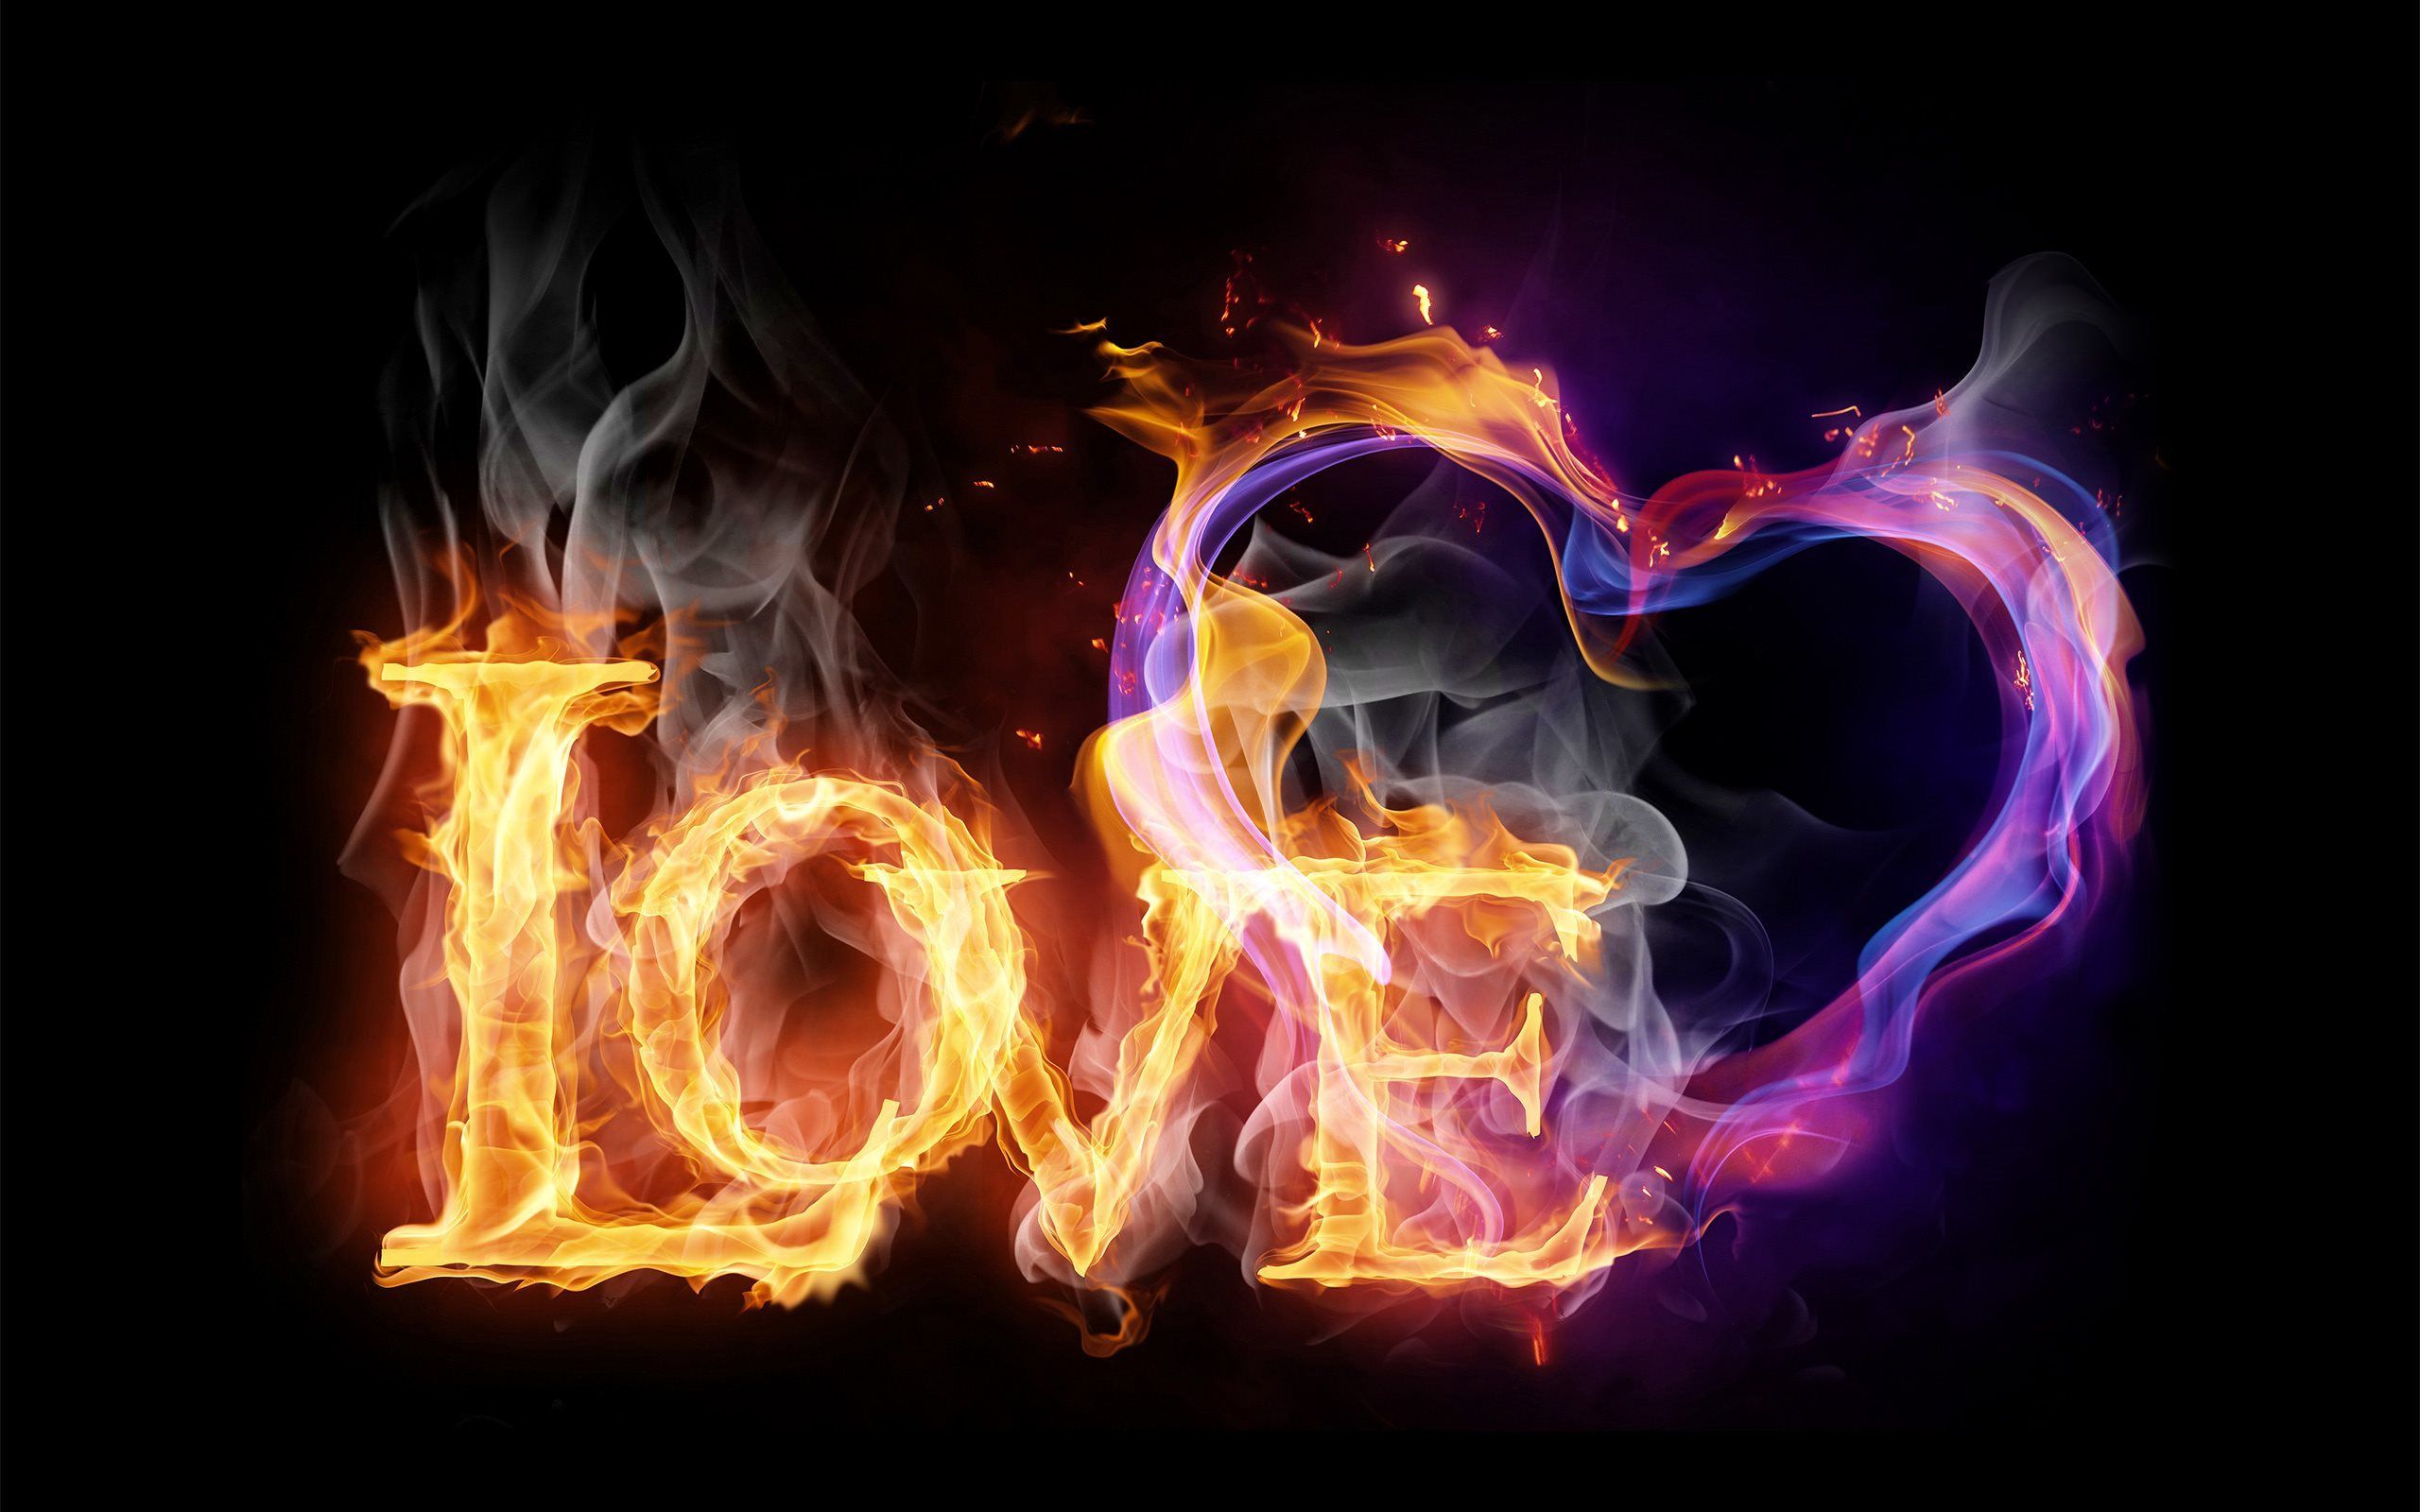 Download wallpaper love, words of love, fire letters, smoke for desktop with resolution 2560x1600. High Quality HD picture wallpaper